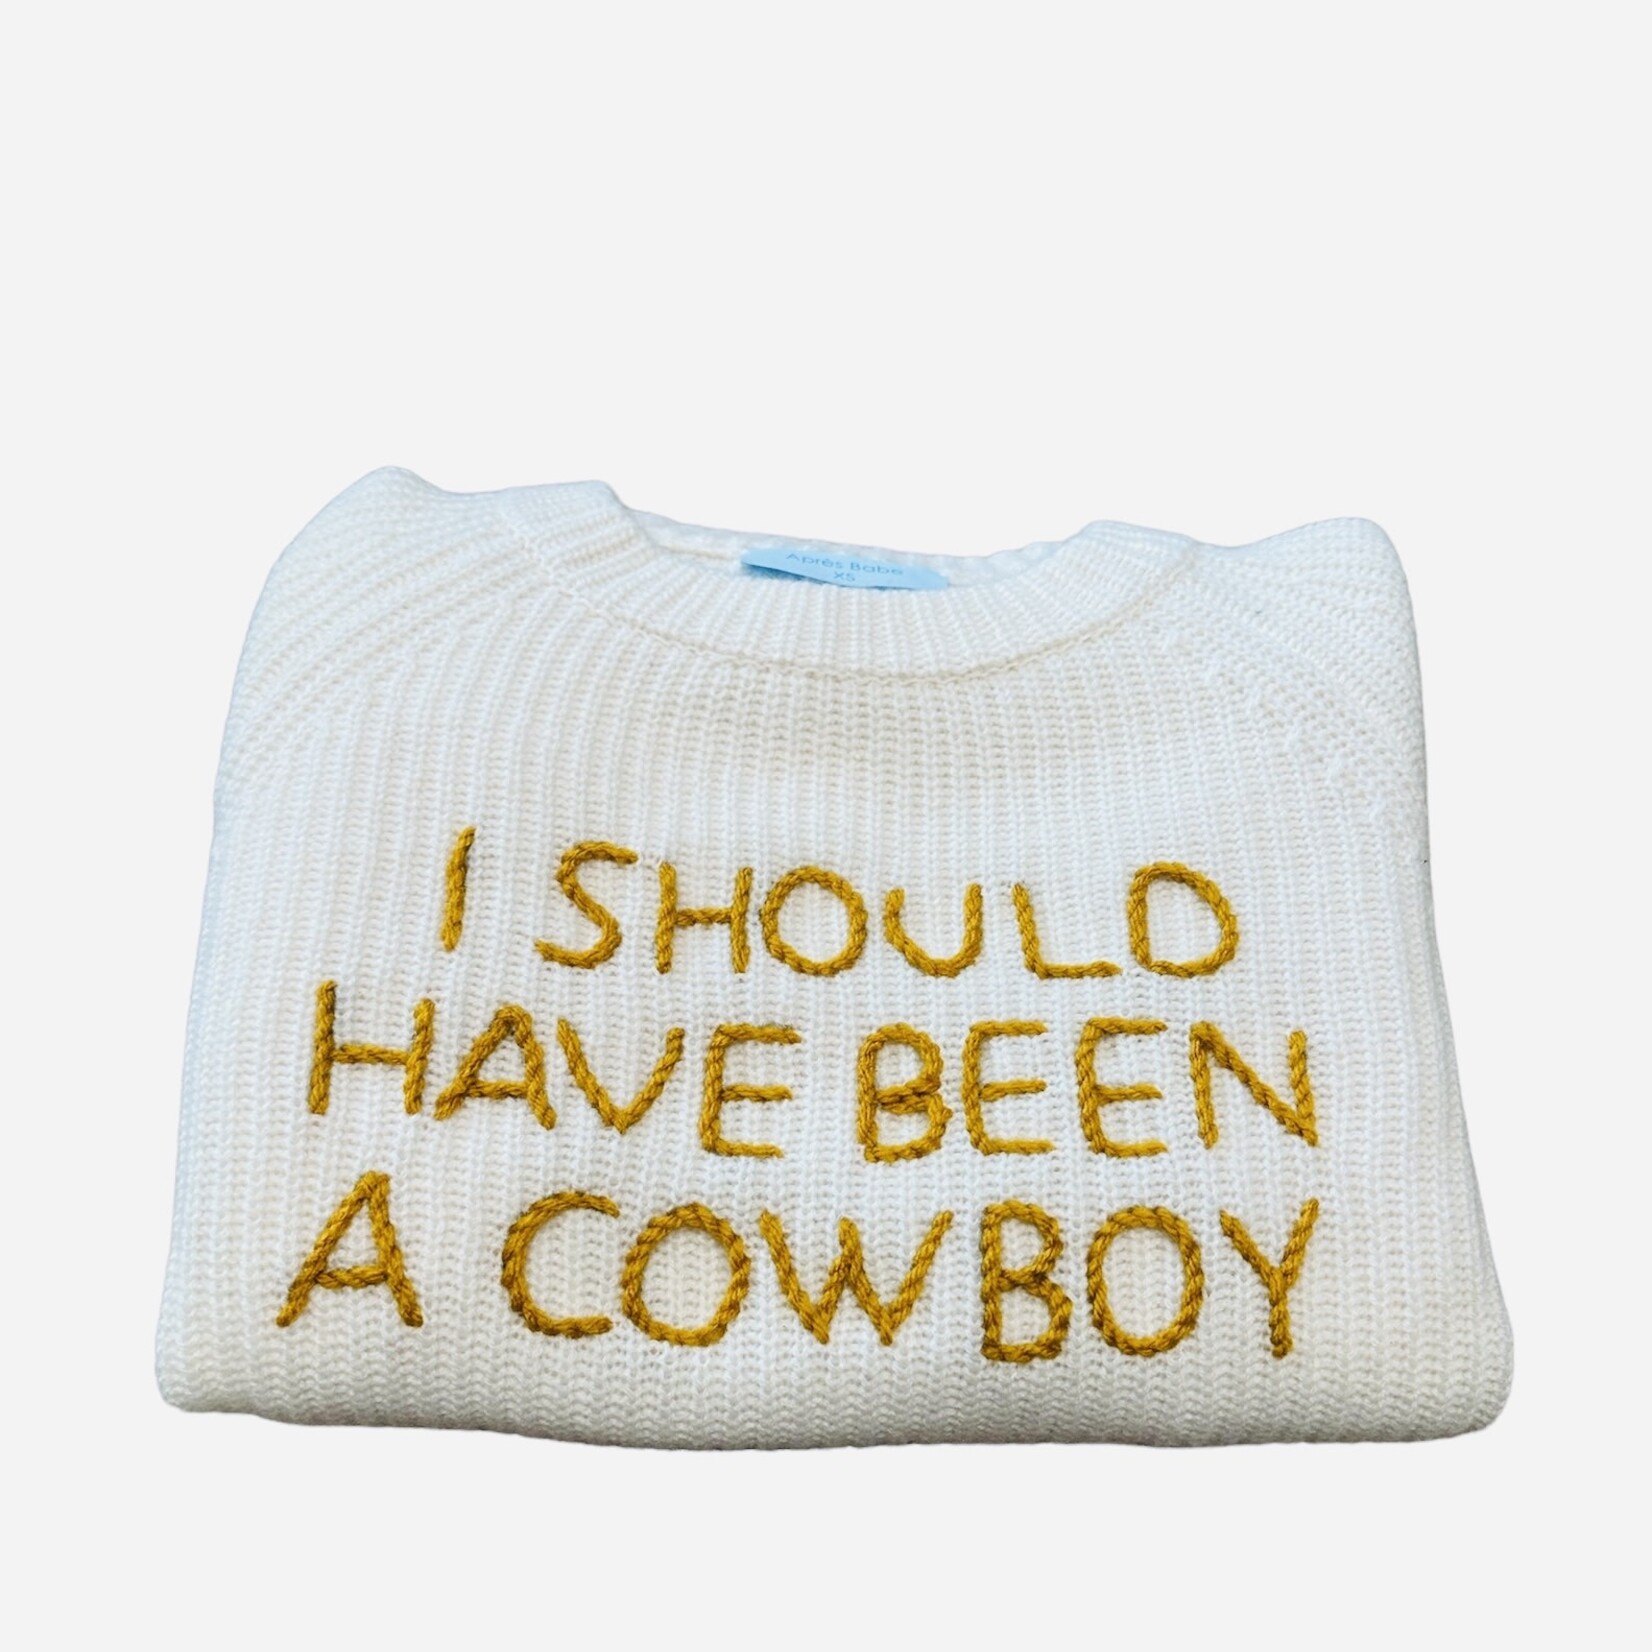 Après Babe Ribbed Cashmere "I SHOULD HAVE BEEN A COWBOY" Sweater